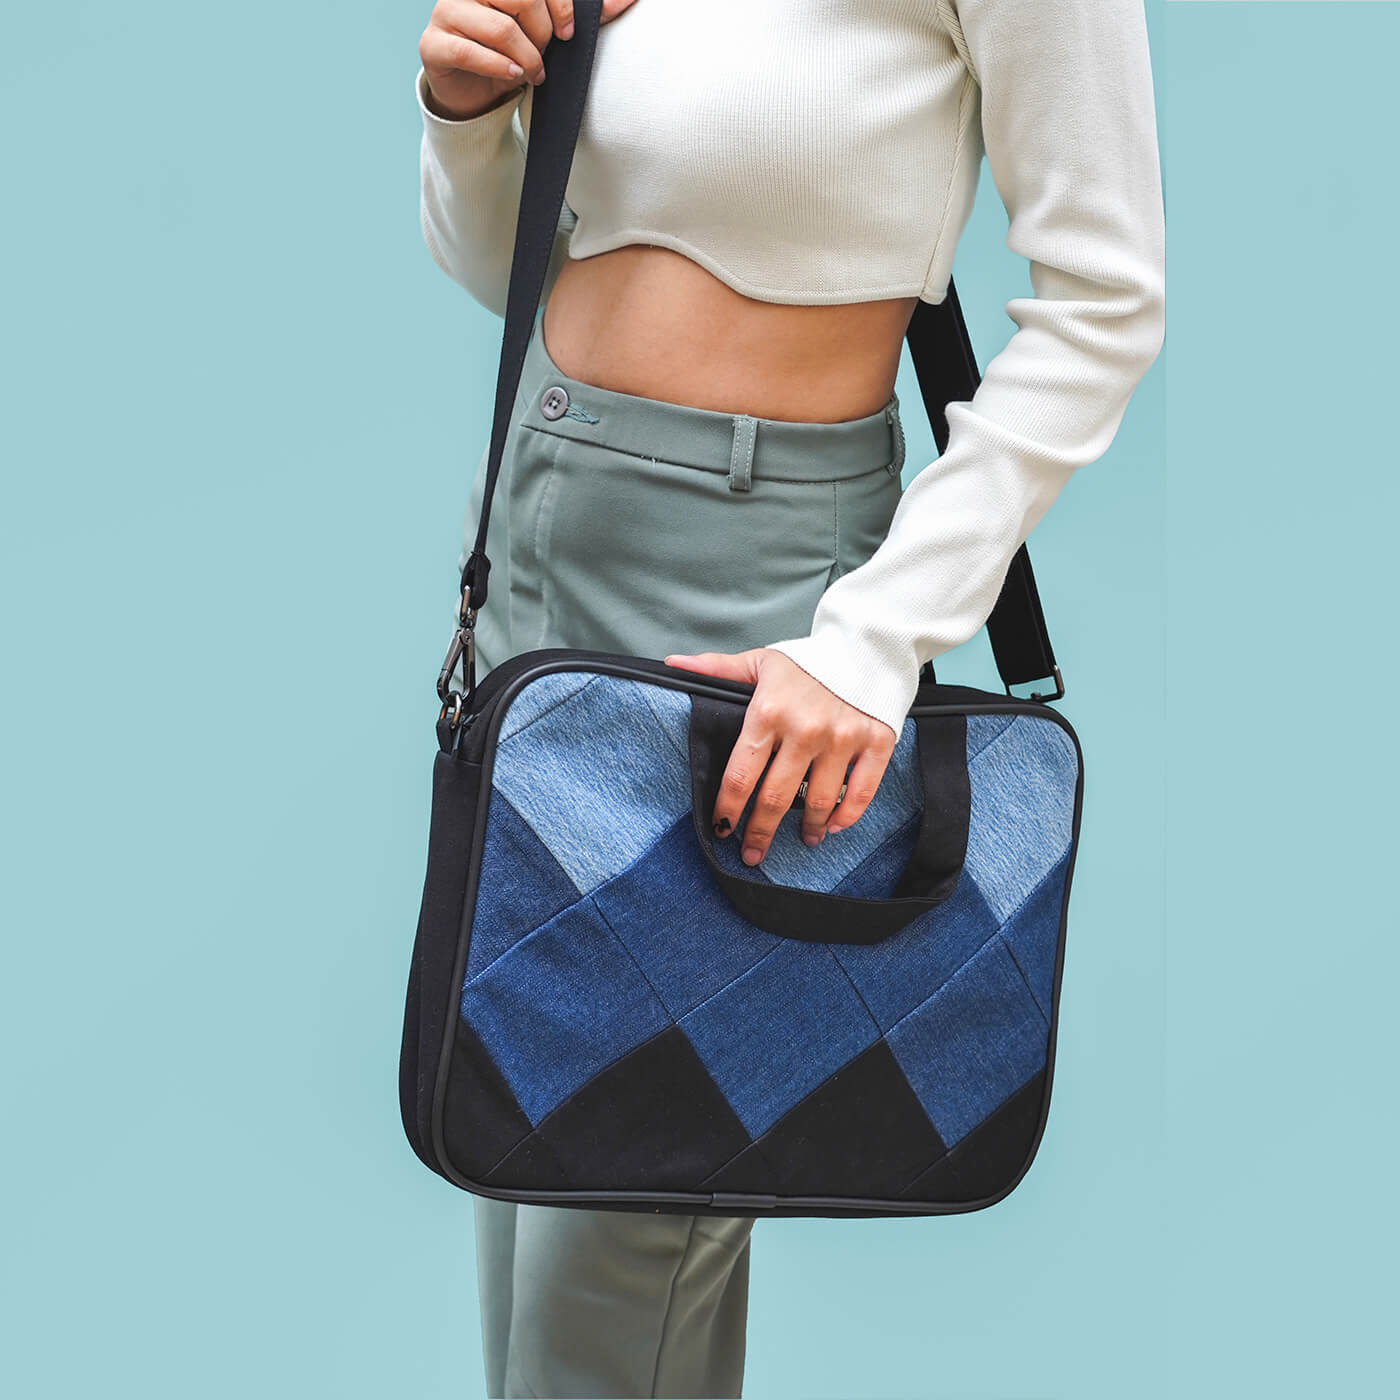 Upcycled Denim Sling Bag With Embroidery | The Green Itch